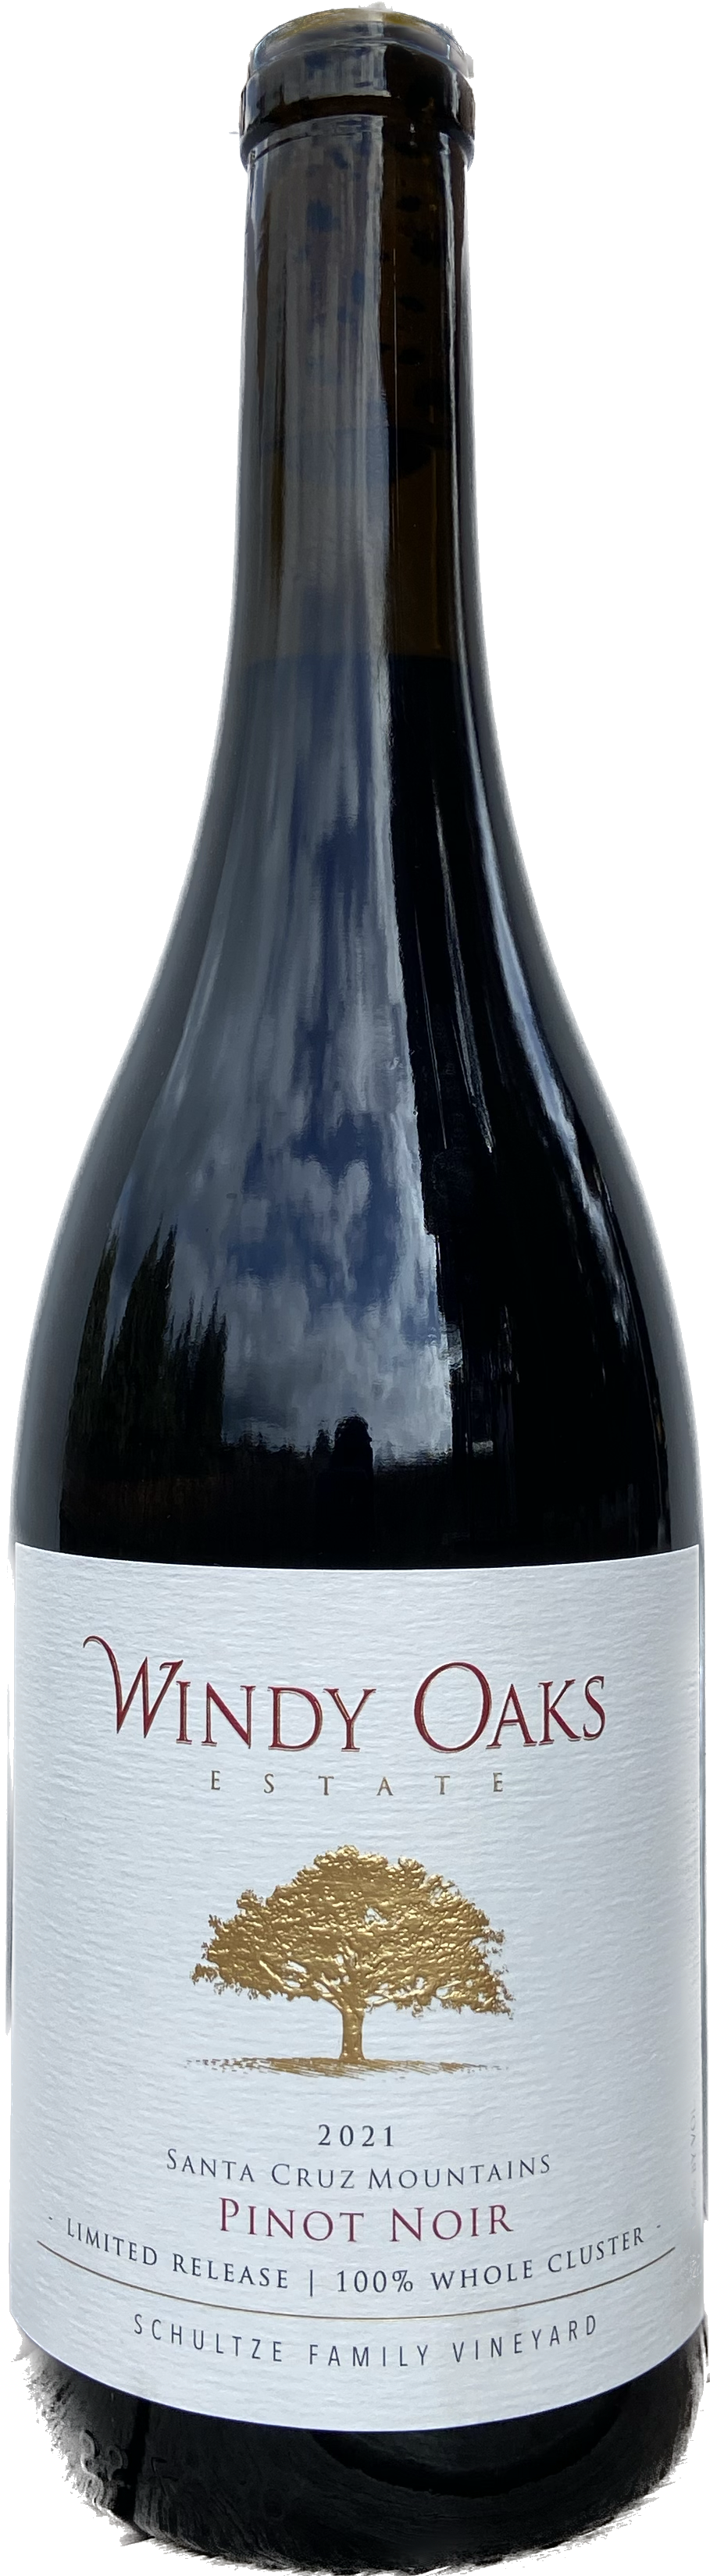 Product Image for 2021 Estate Pinot Noir, Limited Release, Whole Cluster